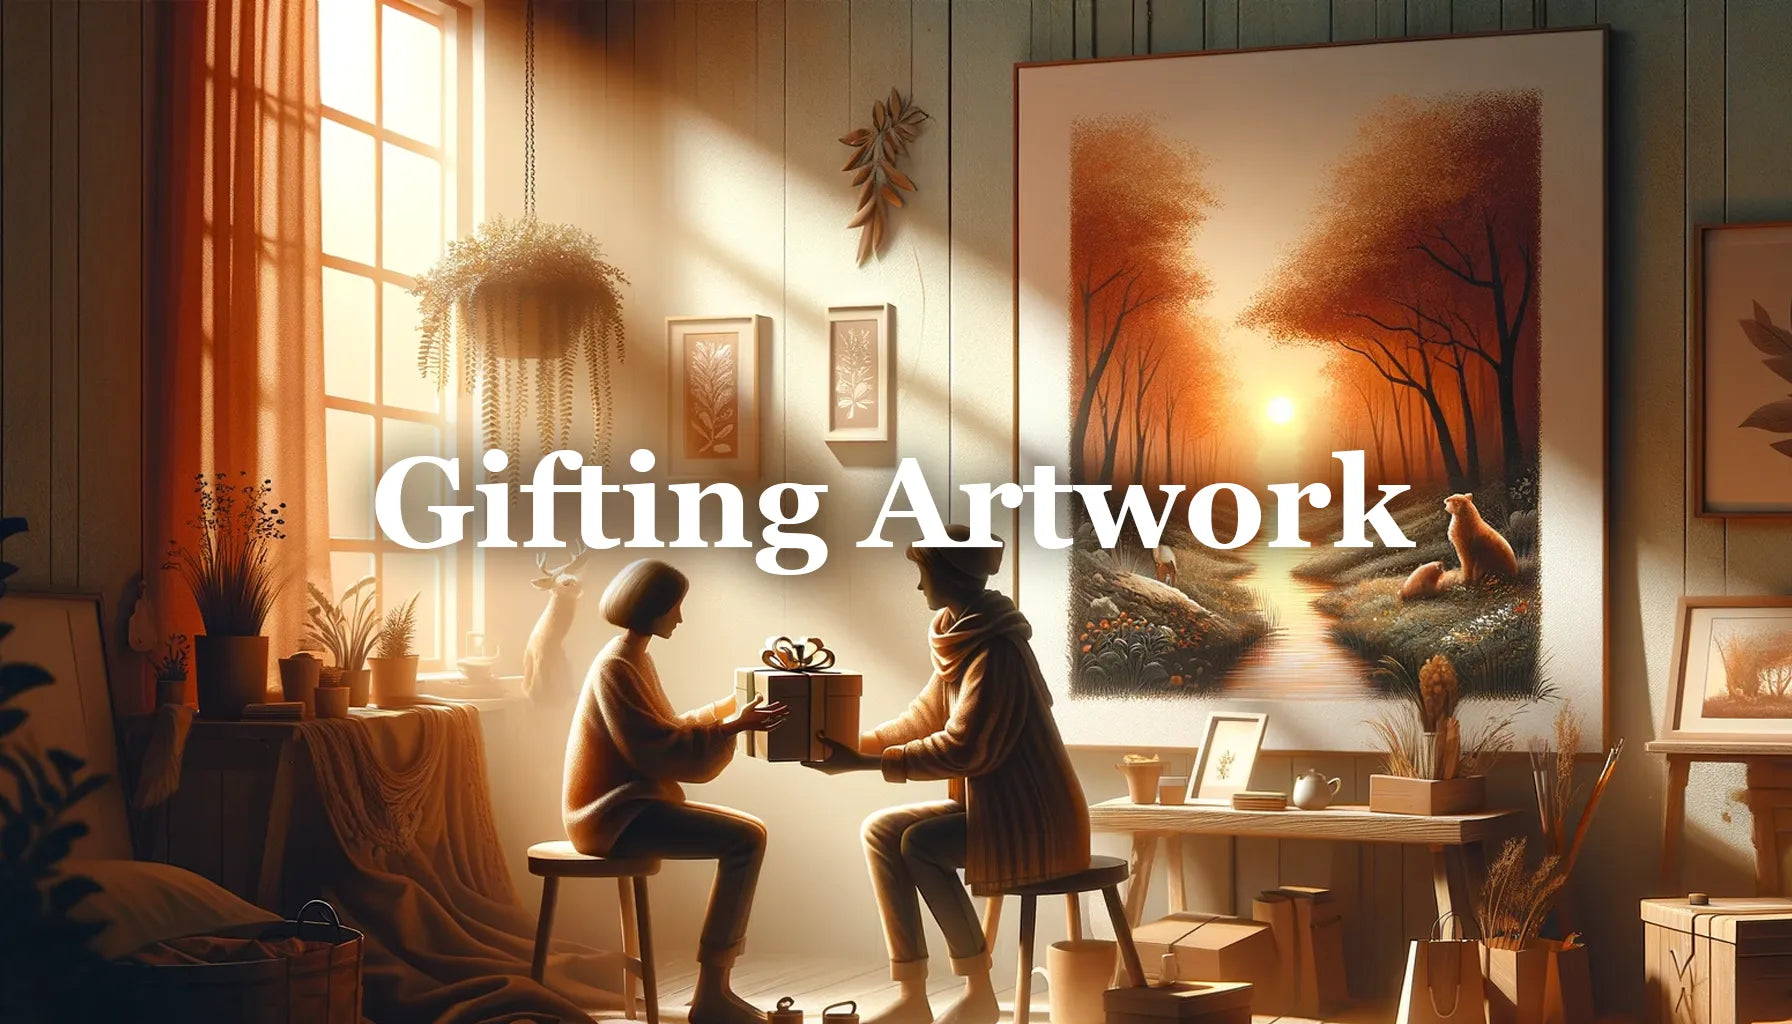 The Art of Gifting: Selecting Meaningful Artwork for Loved Ones